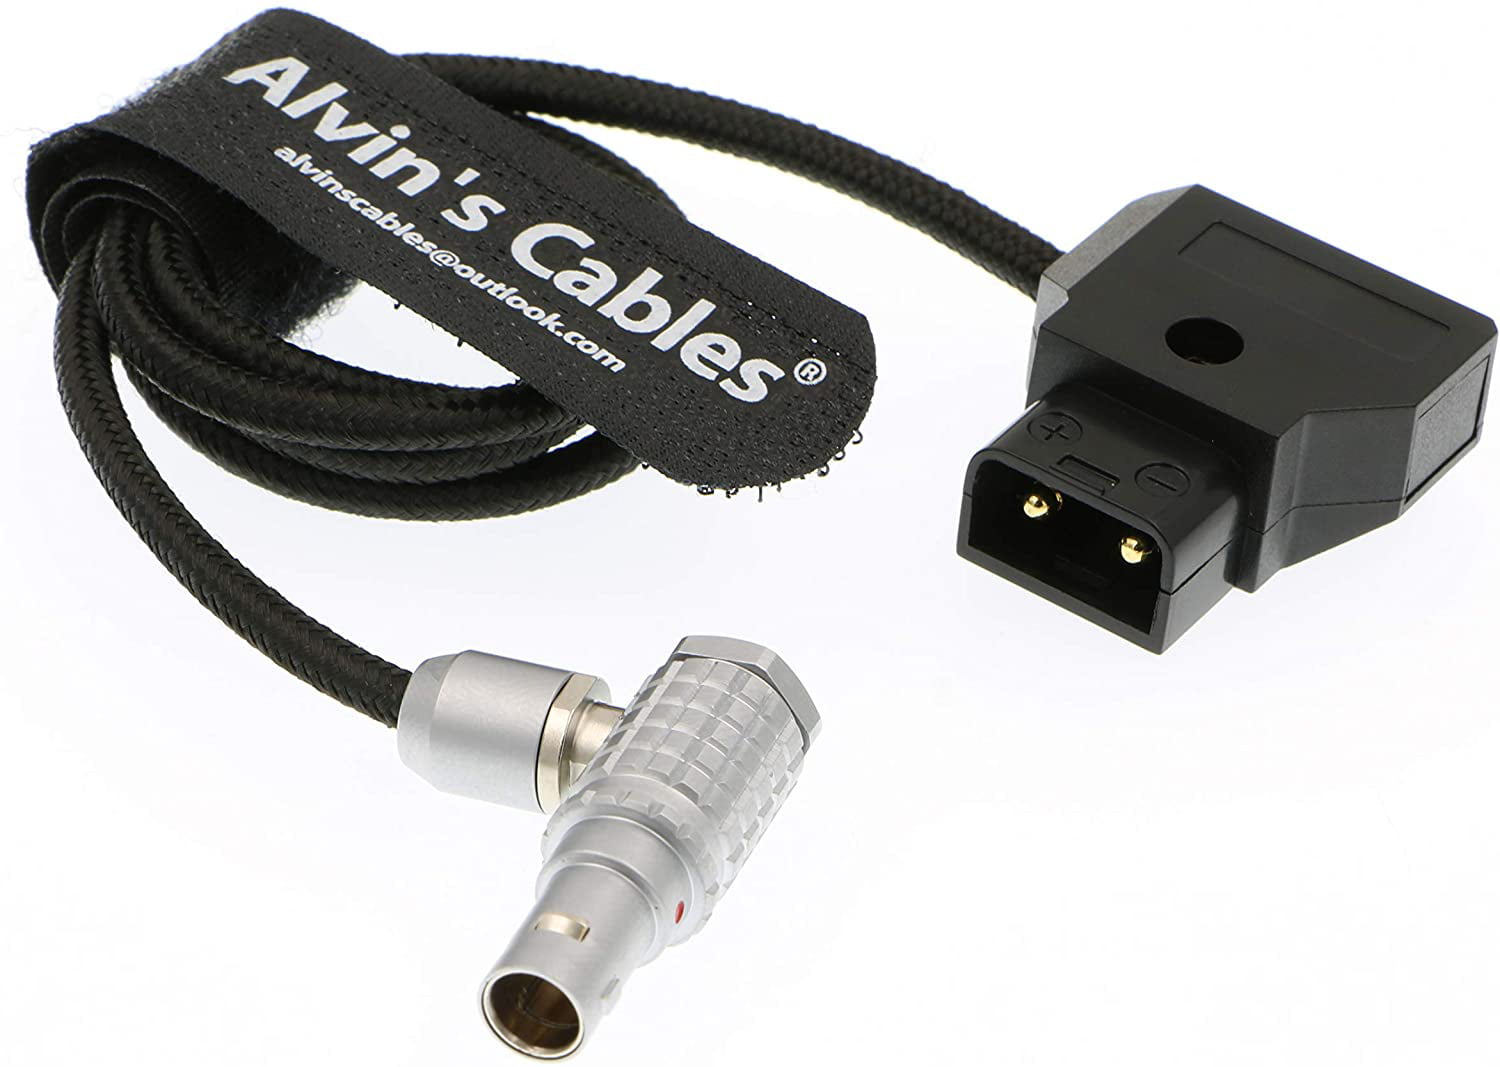 Alvin's Cables Right Angle Convert Connectors for 12G HD SDI BNC Cable One Set 